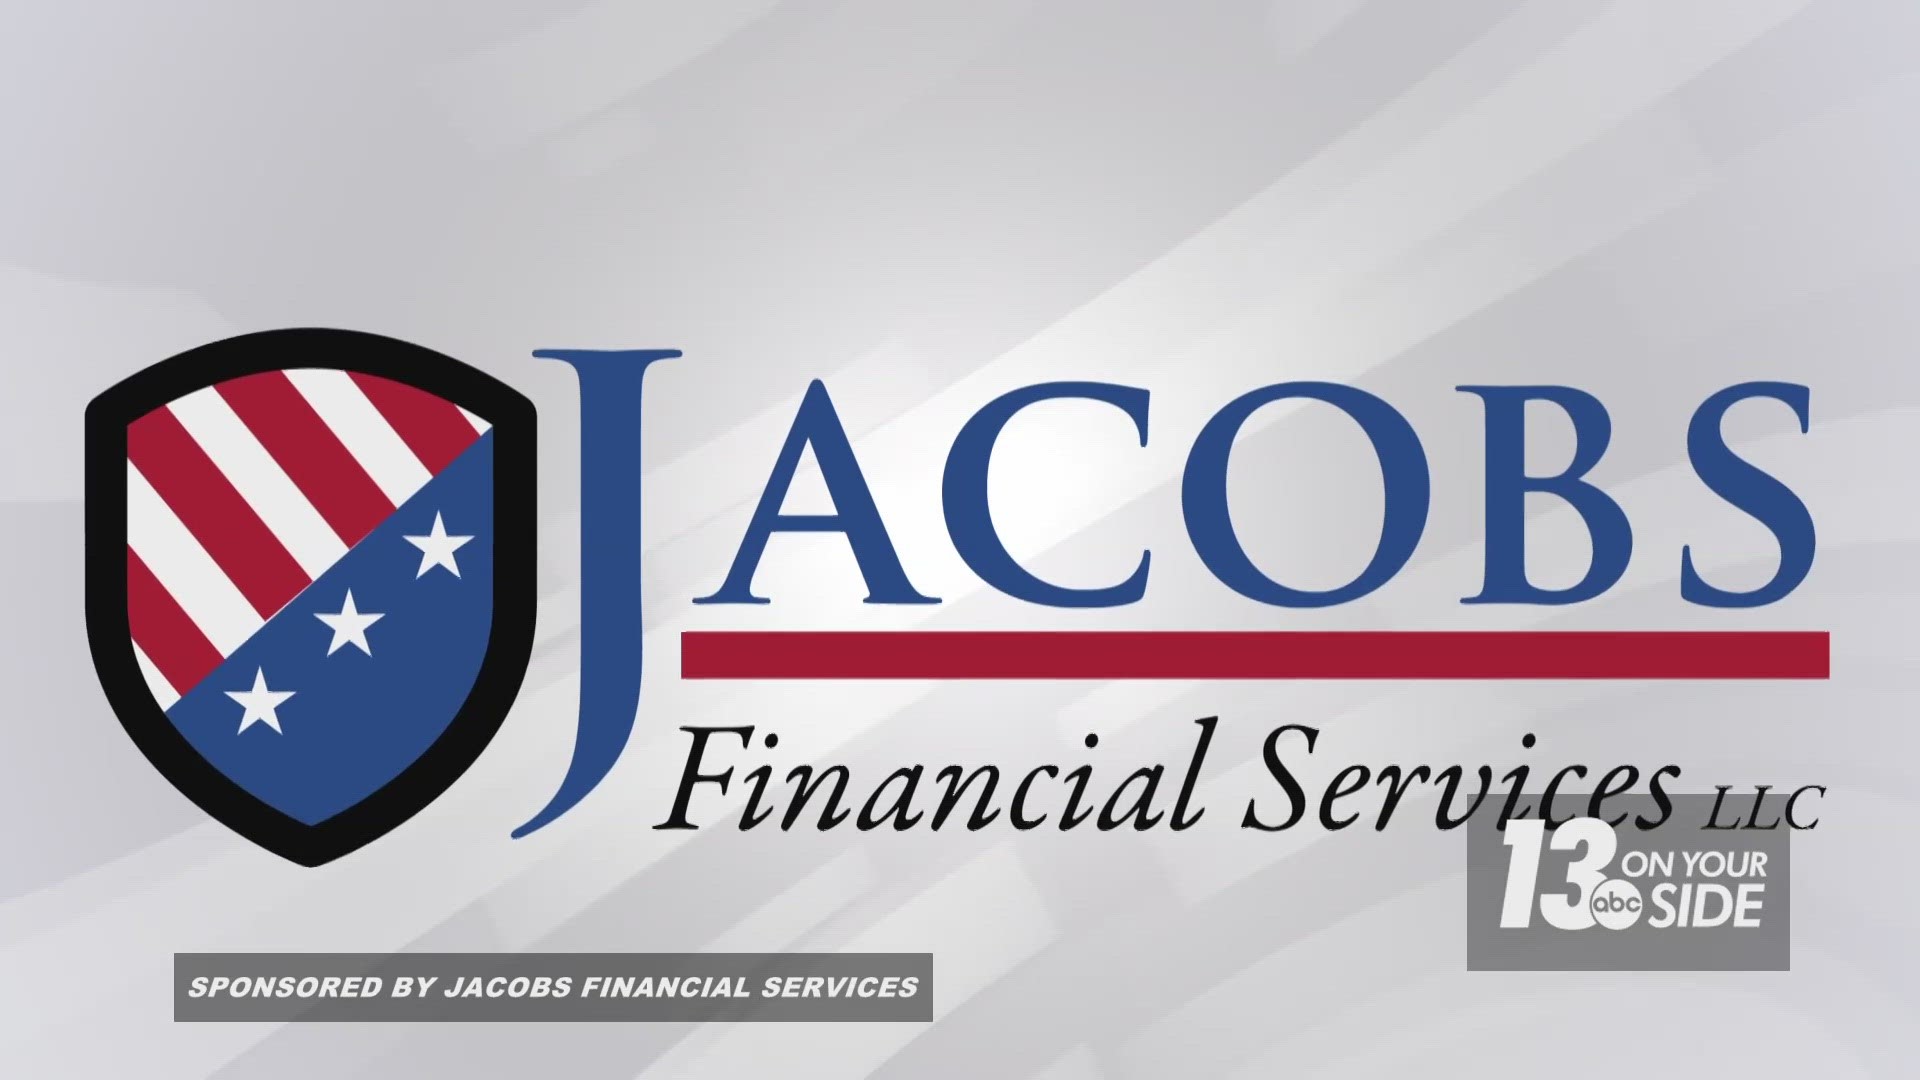 Tom Jacobs and the team at Jacobs Financial Services can help you plan for retirement.